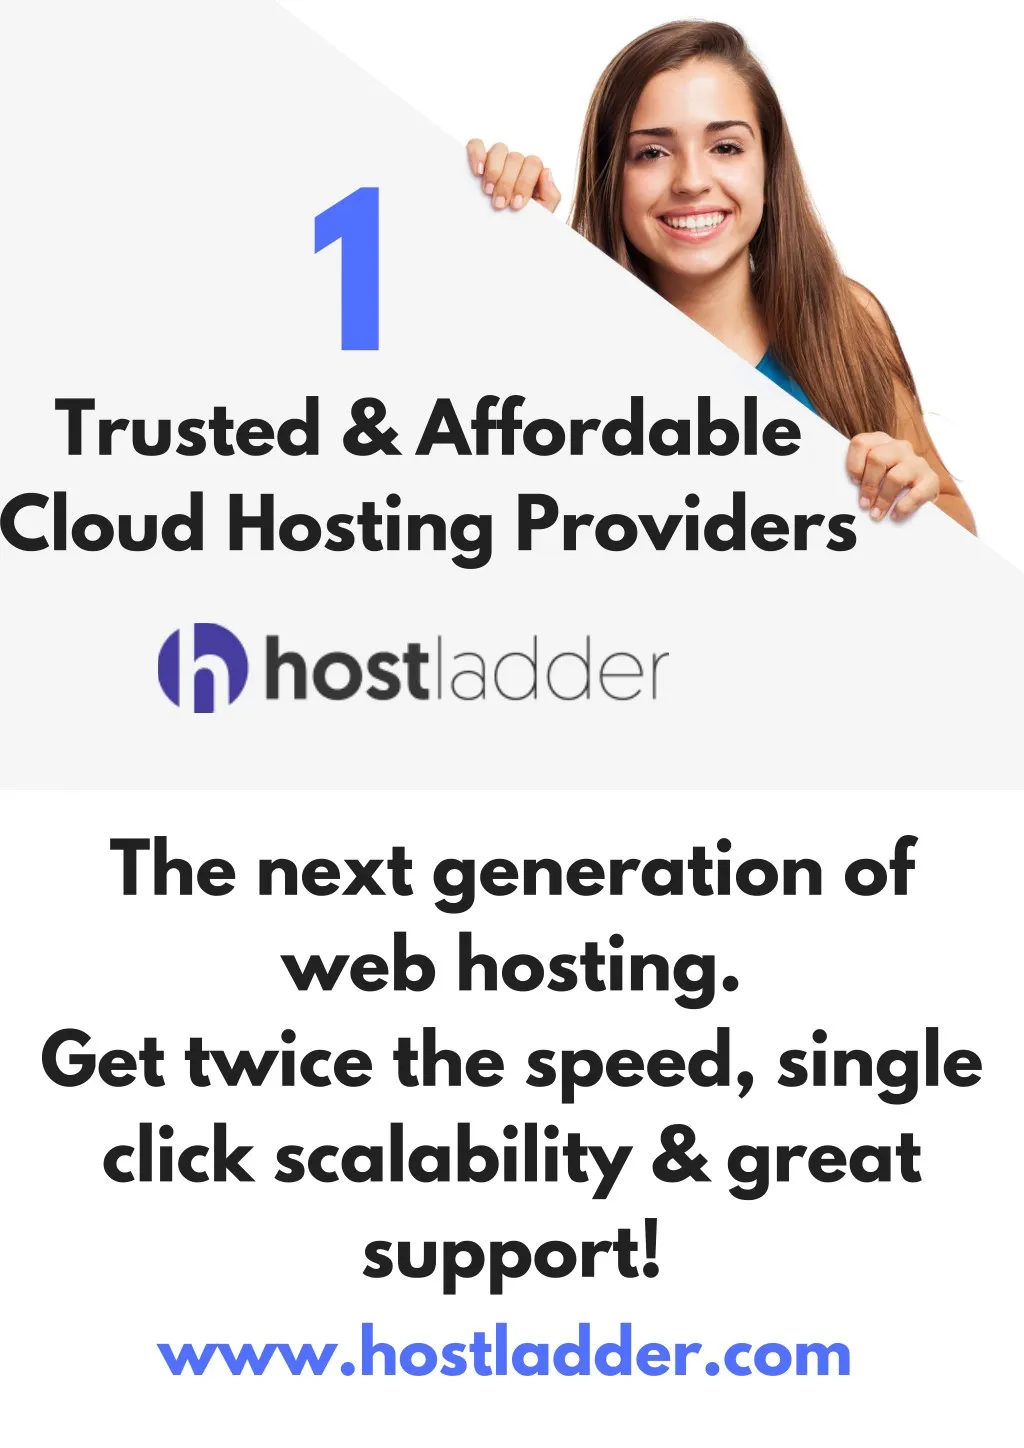 Ppt Best Cloud Hosting Providers 2018 Buy Best Cheap Domain Images, Photos, Reviews